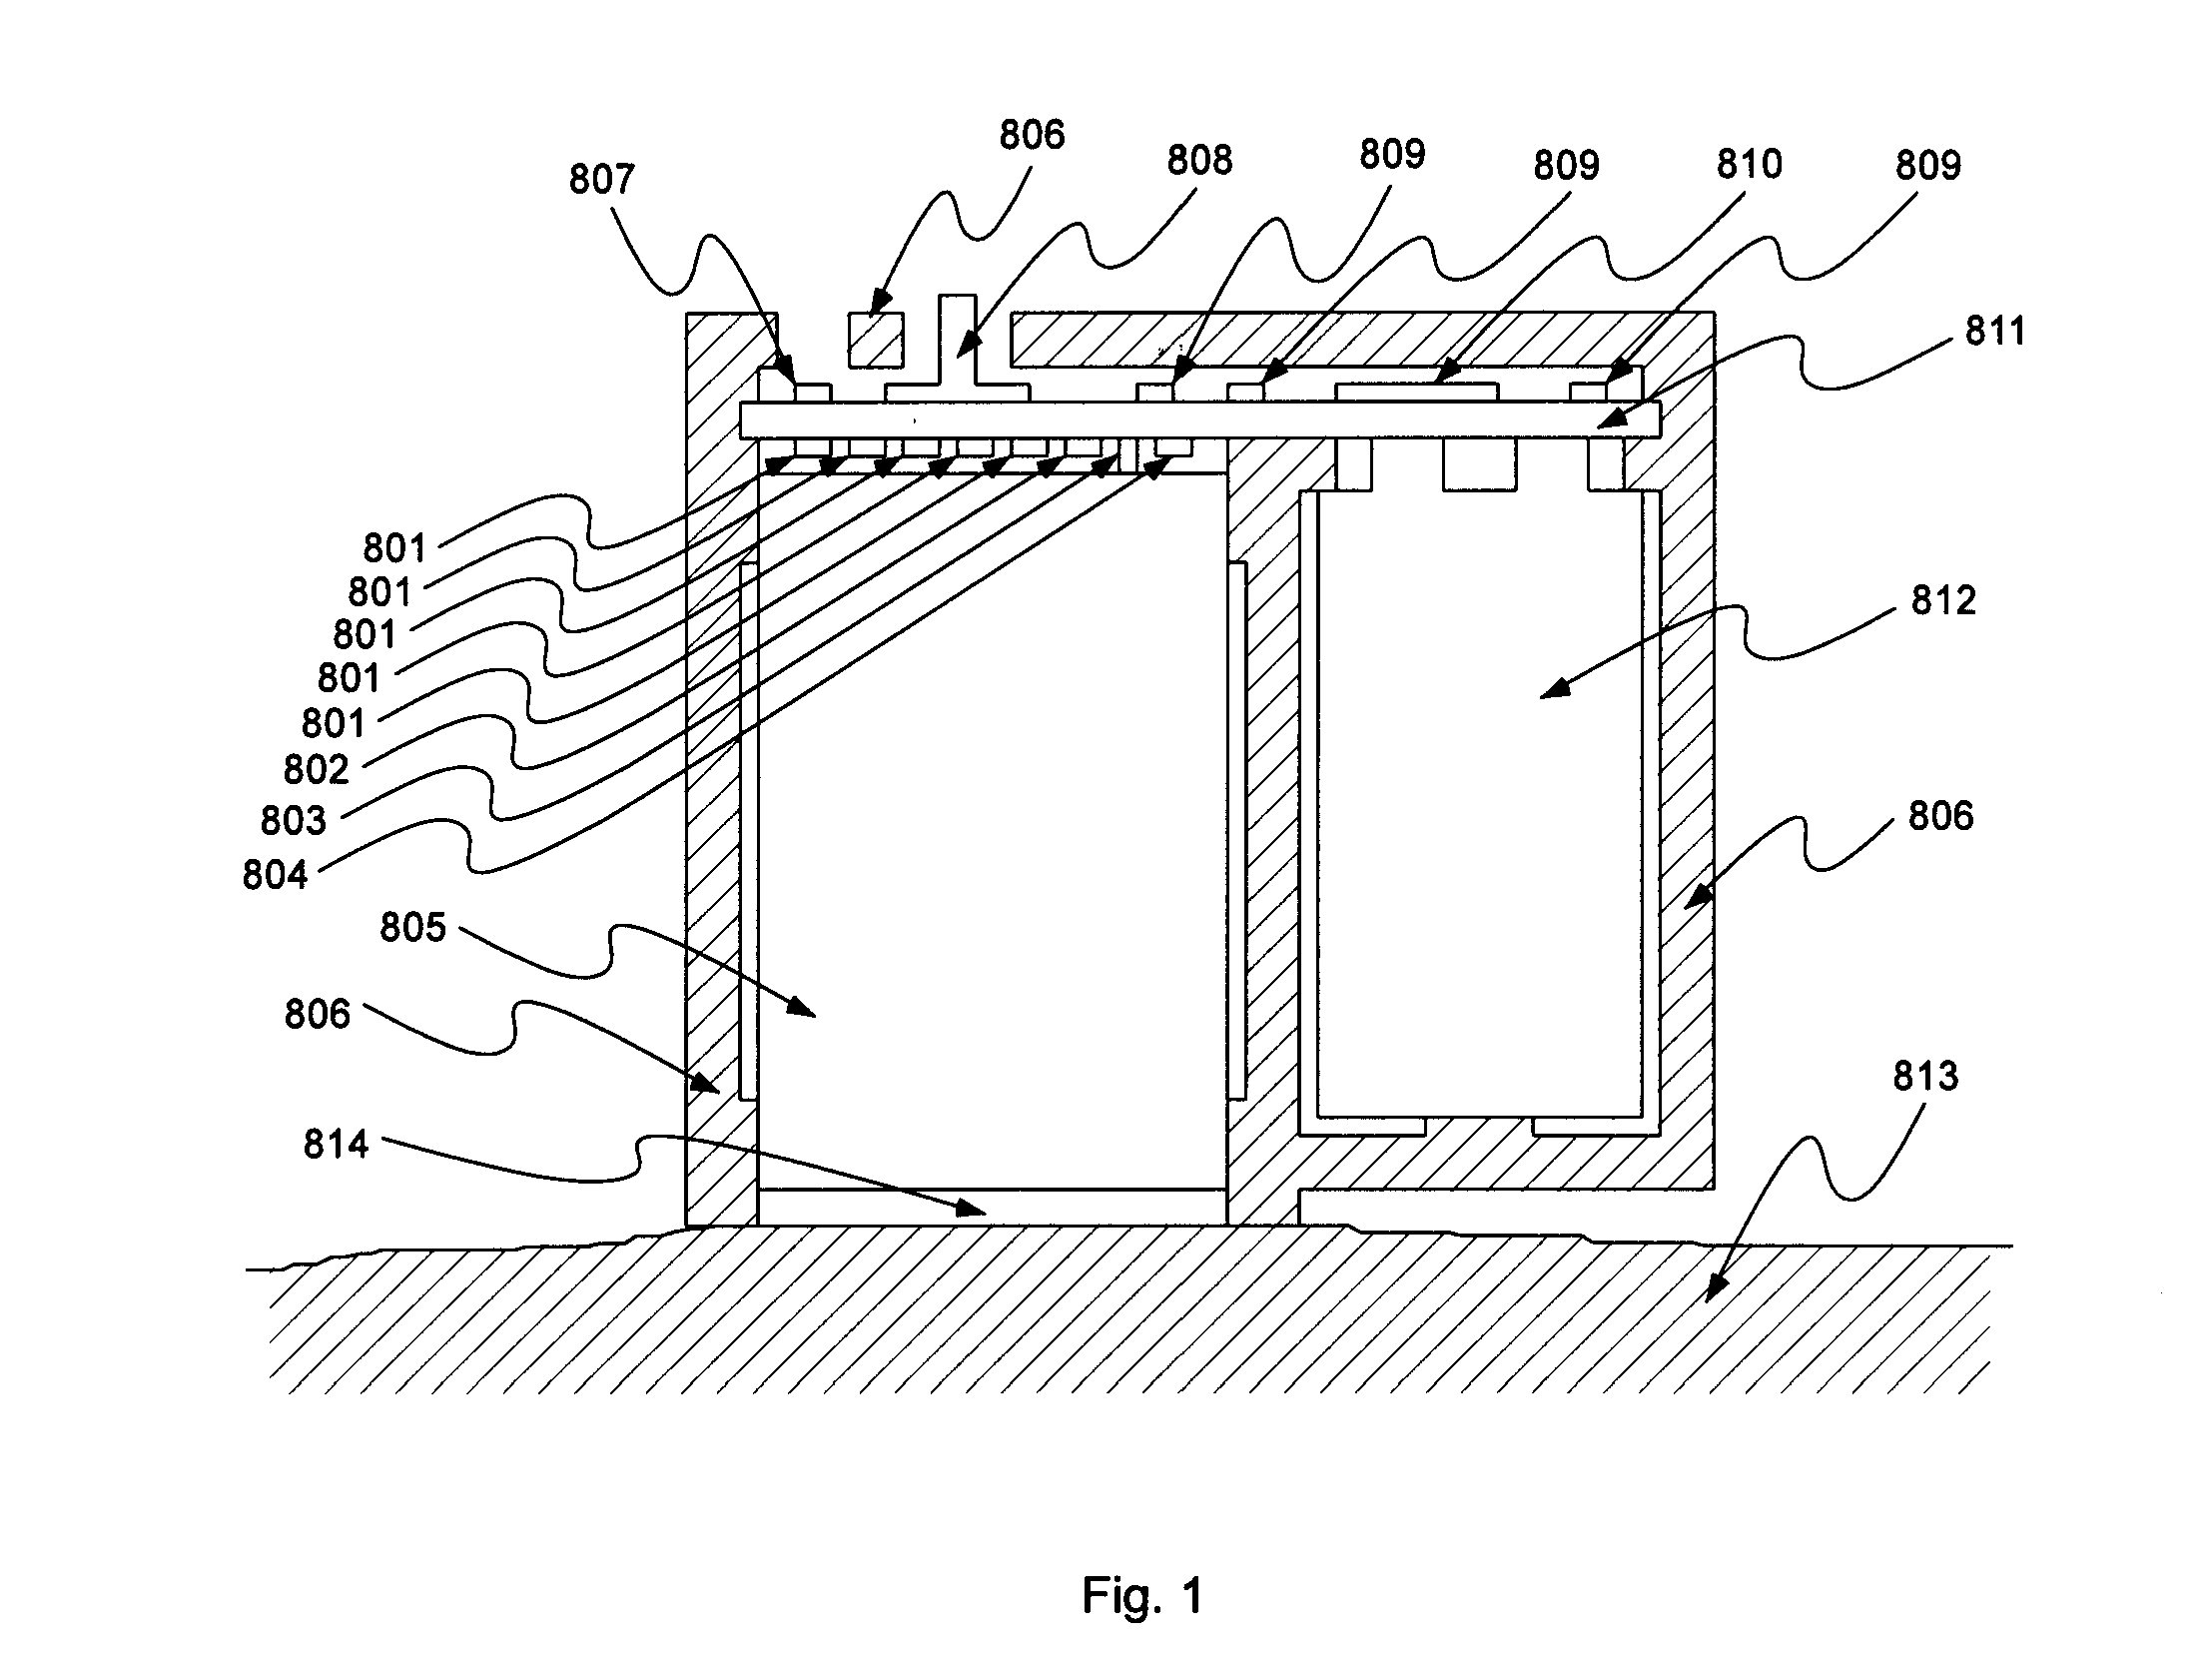 Optical Sensor and Method for Identifying the Presence of Skin and the Pigmentation of Skin